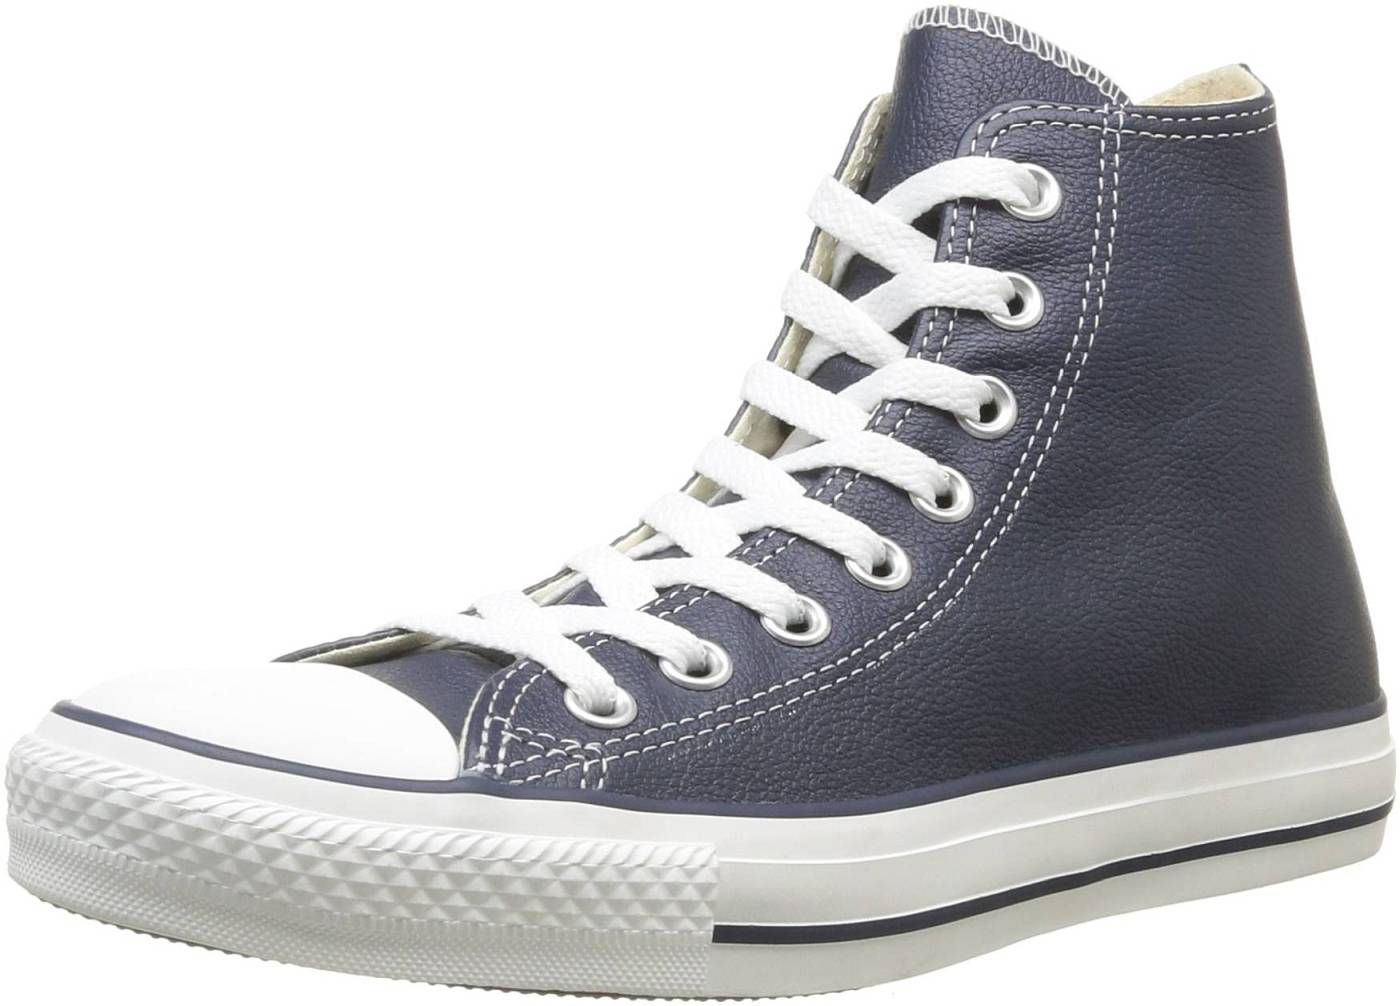 Converse Chuck Taylor All Star Leather High Top – Shoes Reviews ...